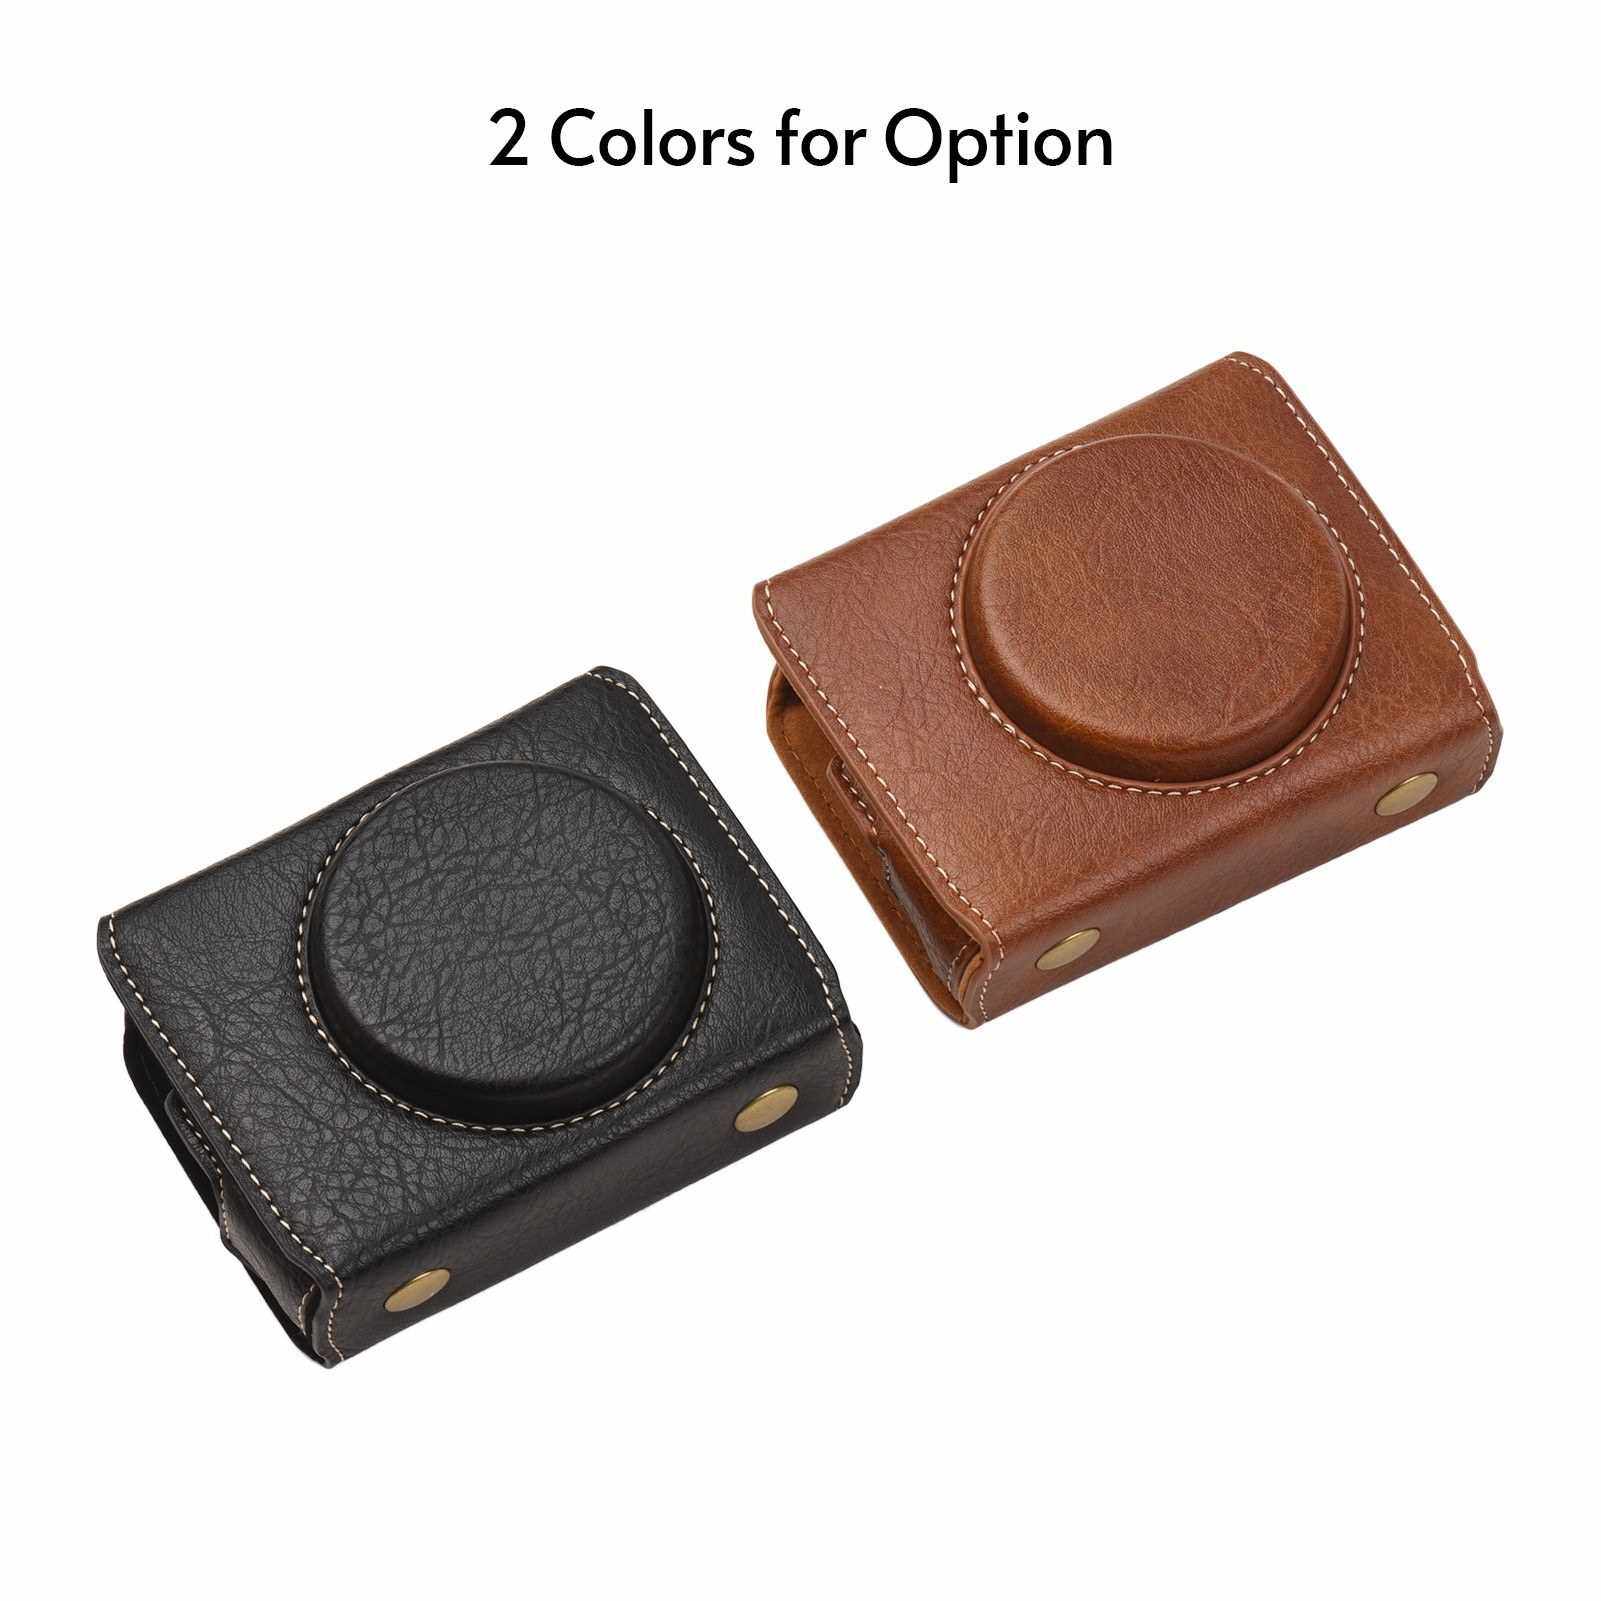 Andoer Vintage PU Leather Camera Case Protective Camera Bag with Strap Replacement for SONY RX100 VII VI V IV III II I HX90 HX80 HX99 HX95 HX60V HX50 HX30 HX20 (Brown)